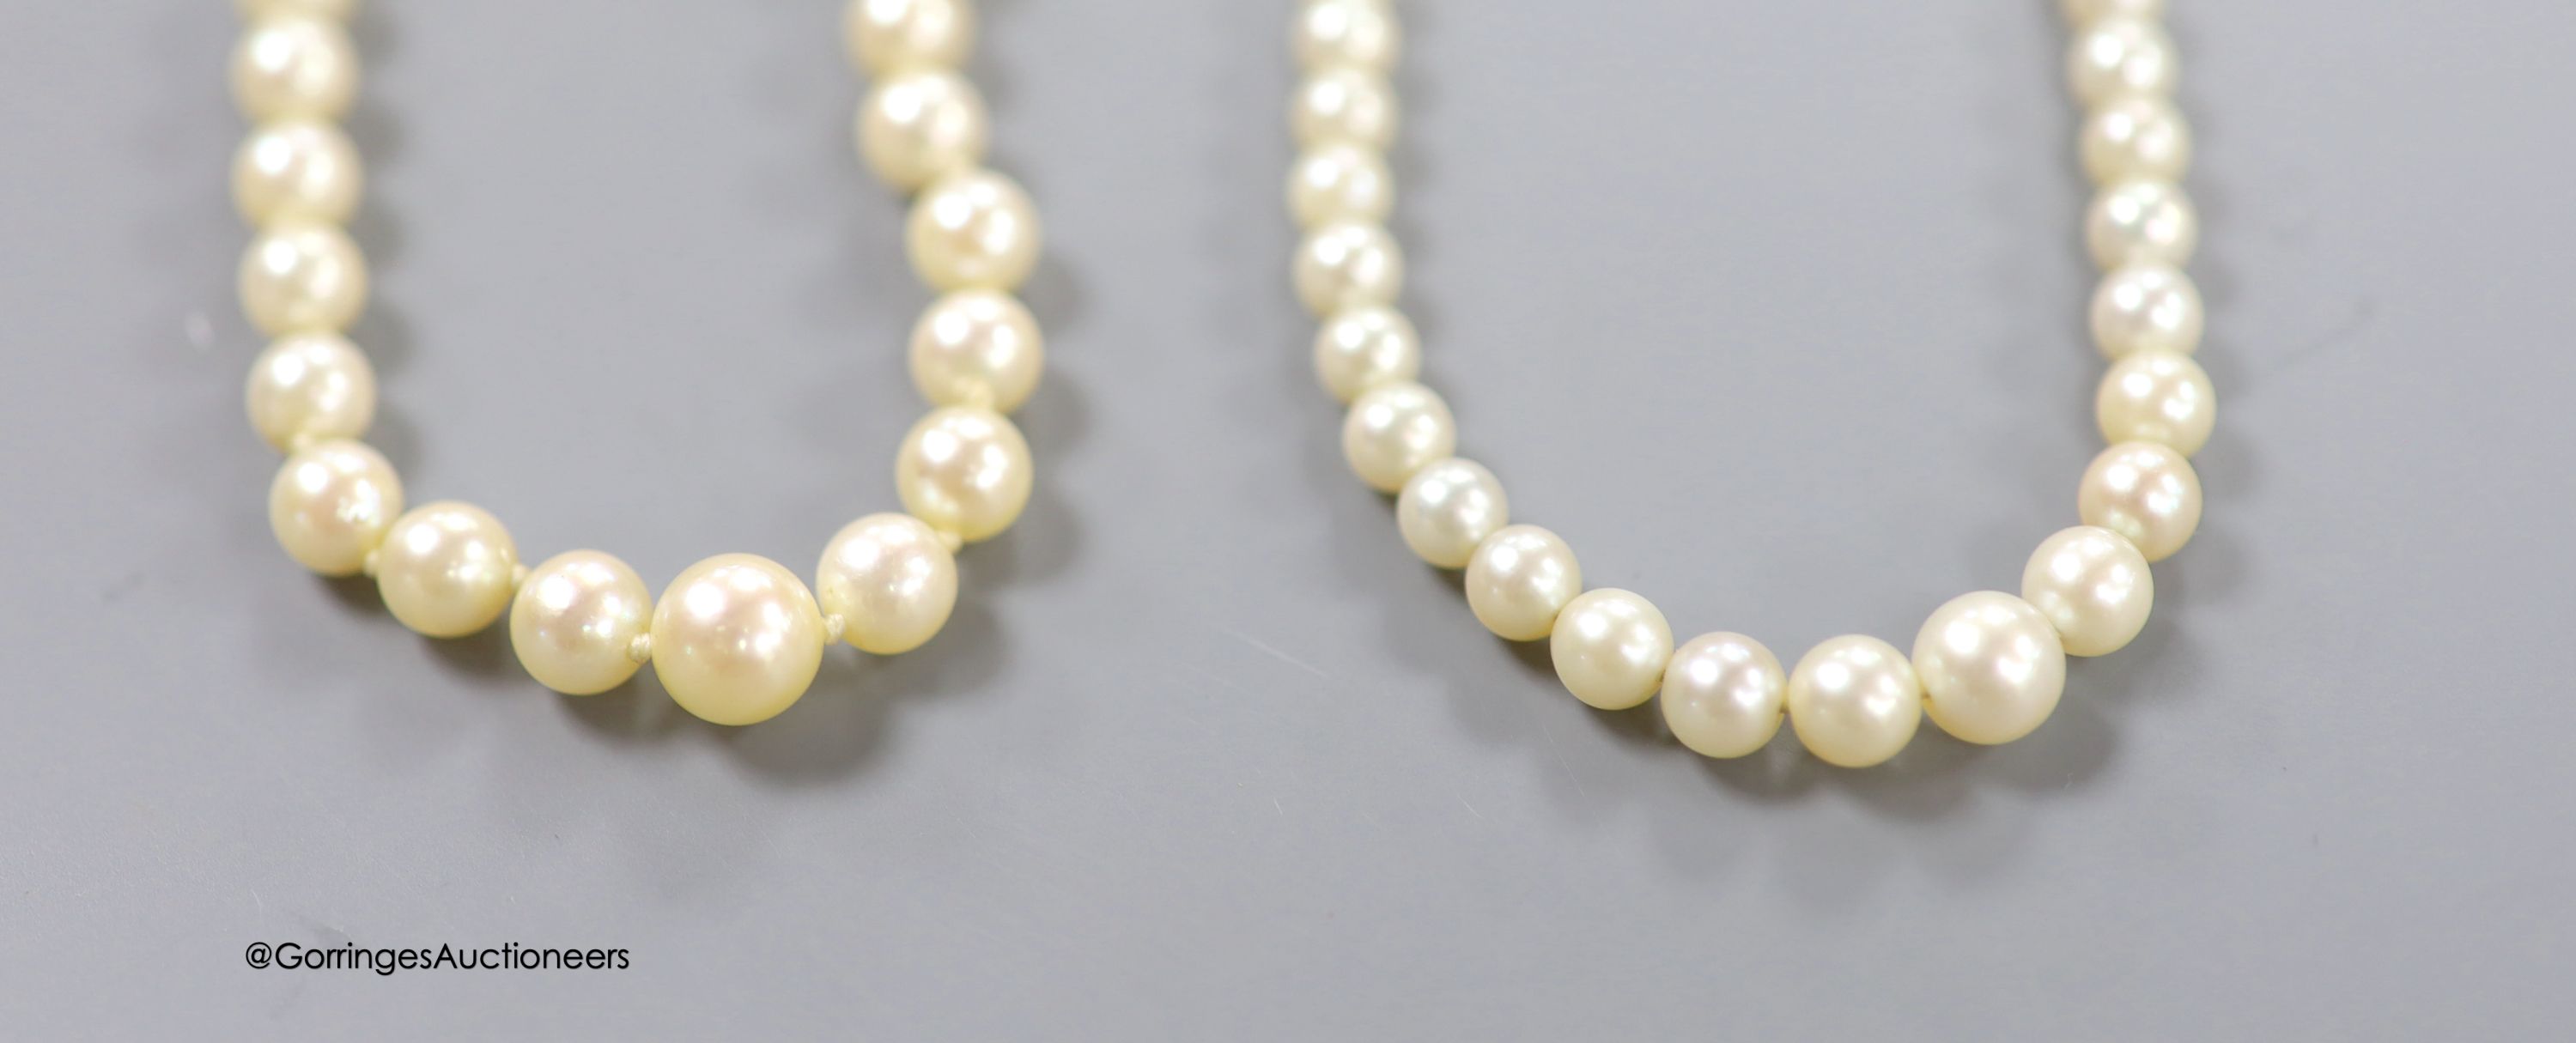 Two single strand graduated cultured pearl necklaces, one with 14k white metal clasp,45cm, the other with 9ct white metal clasp, 40cm.